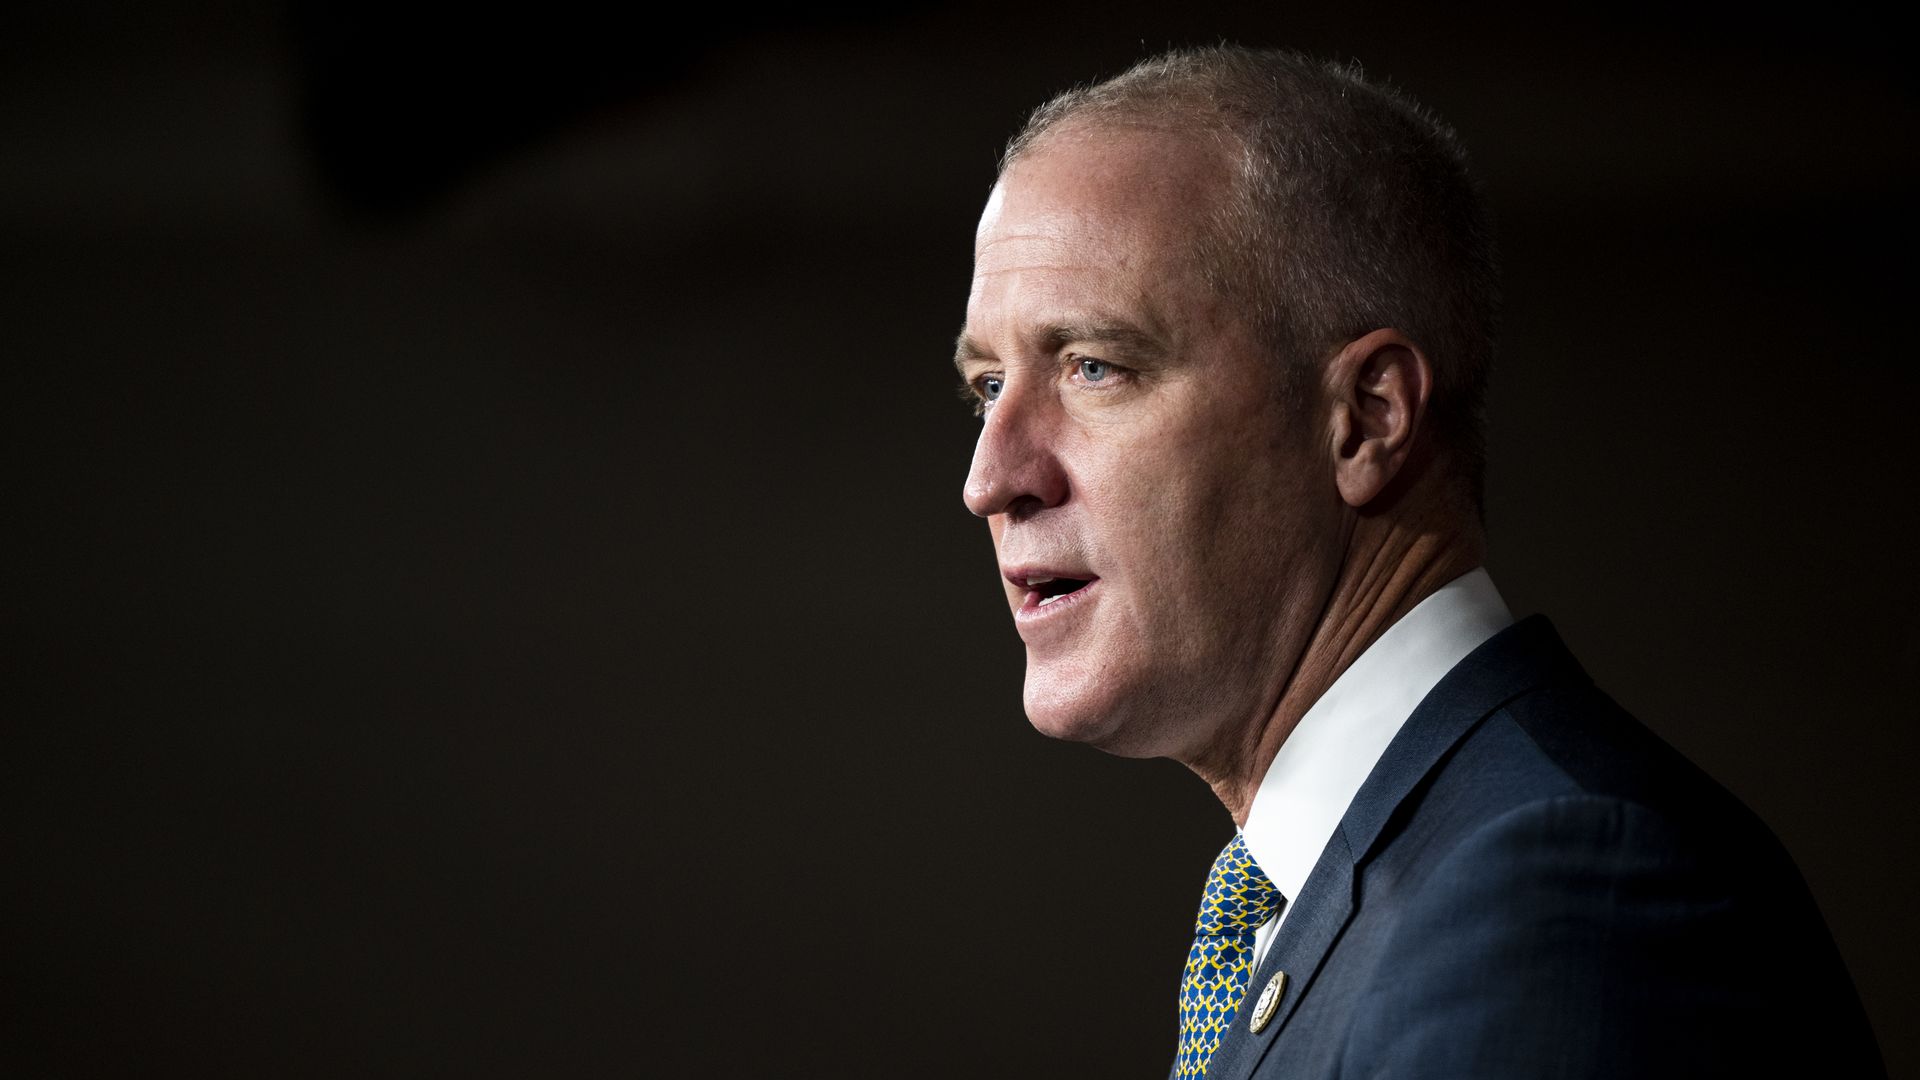 Rep. Sean Patrick Maloney wearing a blue suit jacket, yellow and blue tie and congressional pin against a black backdrop.